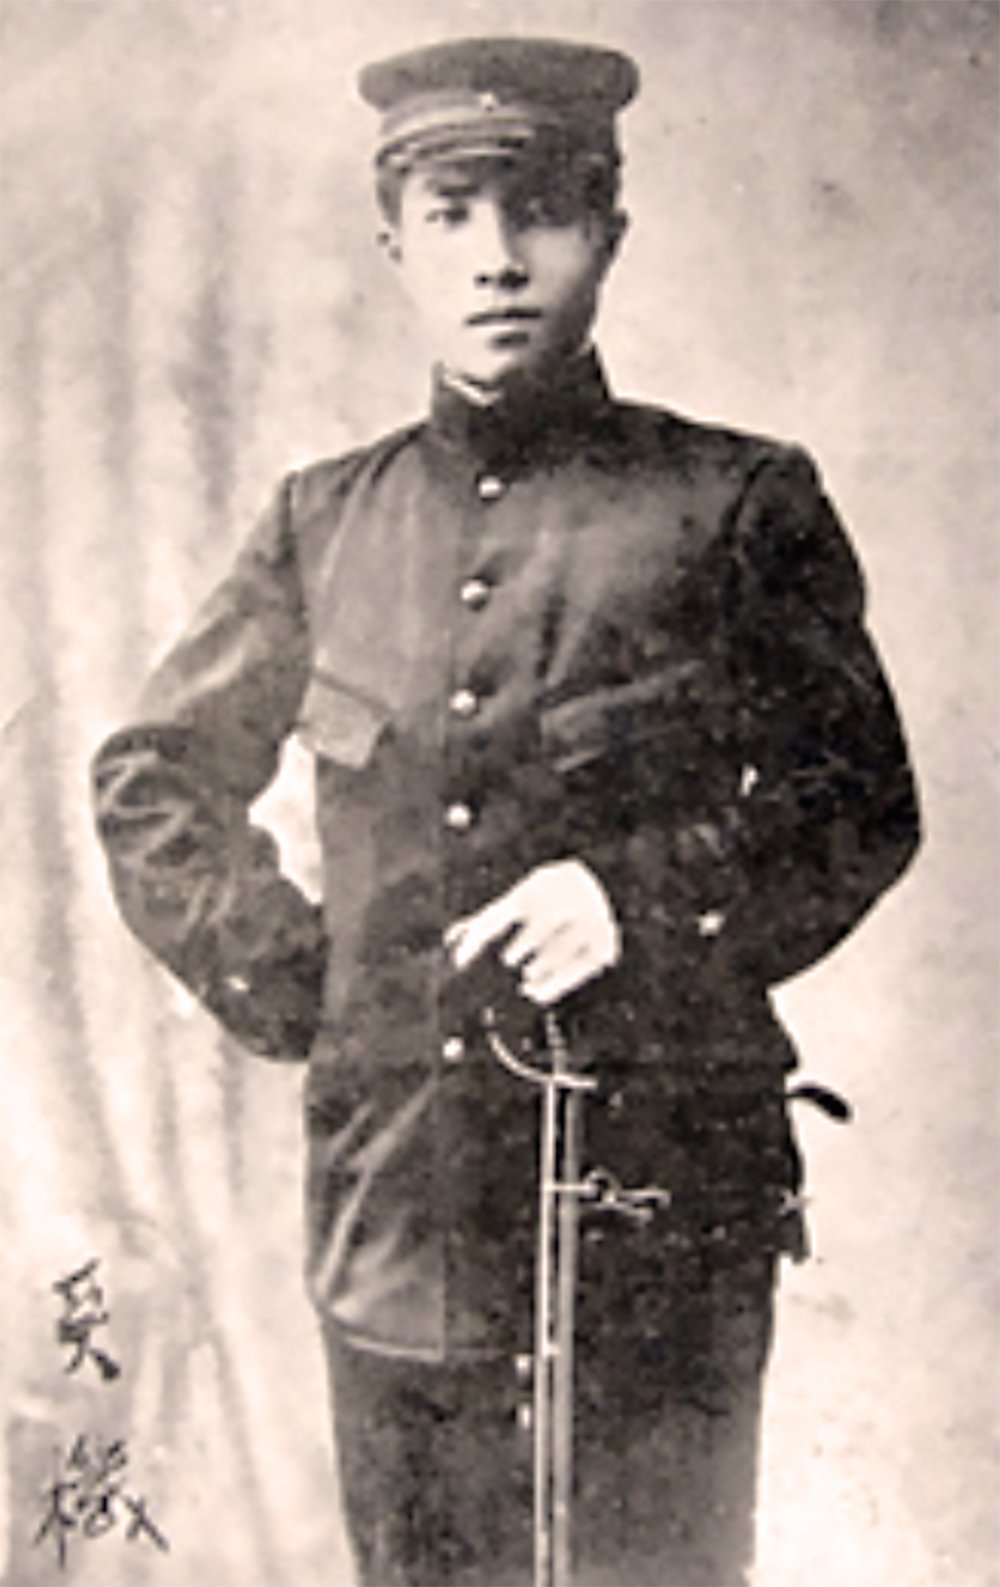 A historical photo of young Hideki Tojo in a military uniform holding a sword. He is standing with a confident pose and is wearing a military cap. The background is light-colored with a faint pattern.